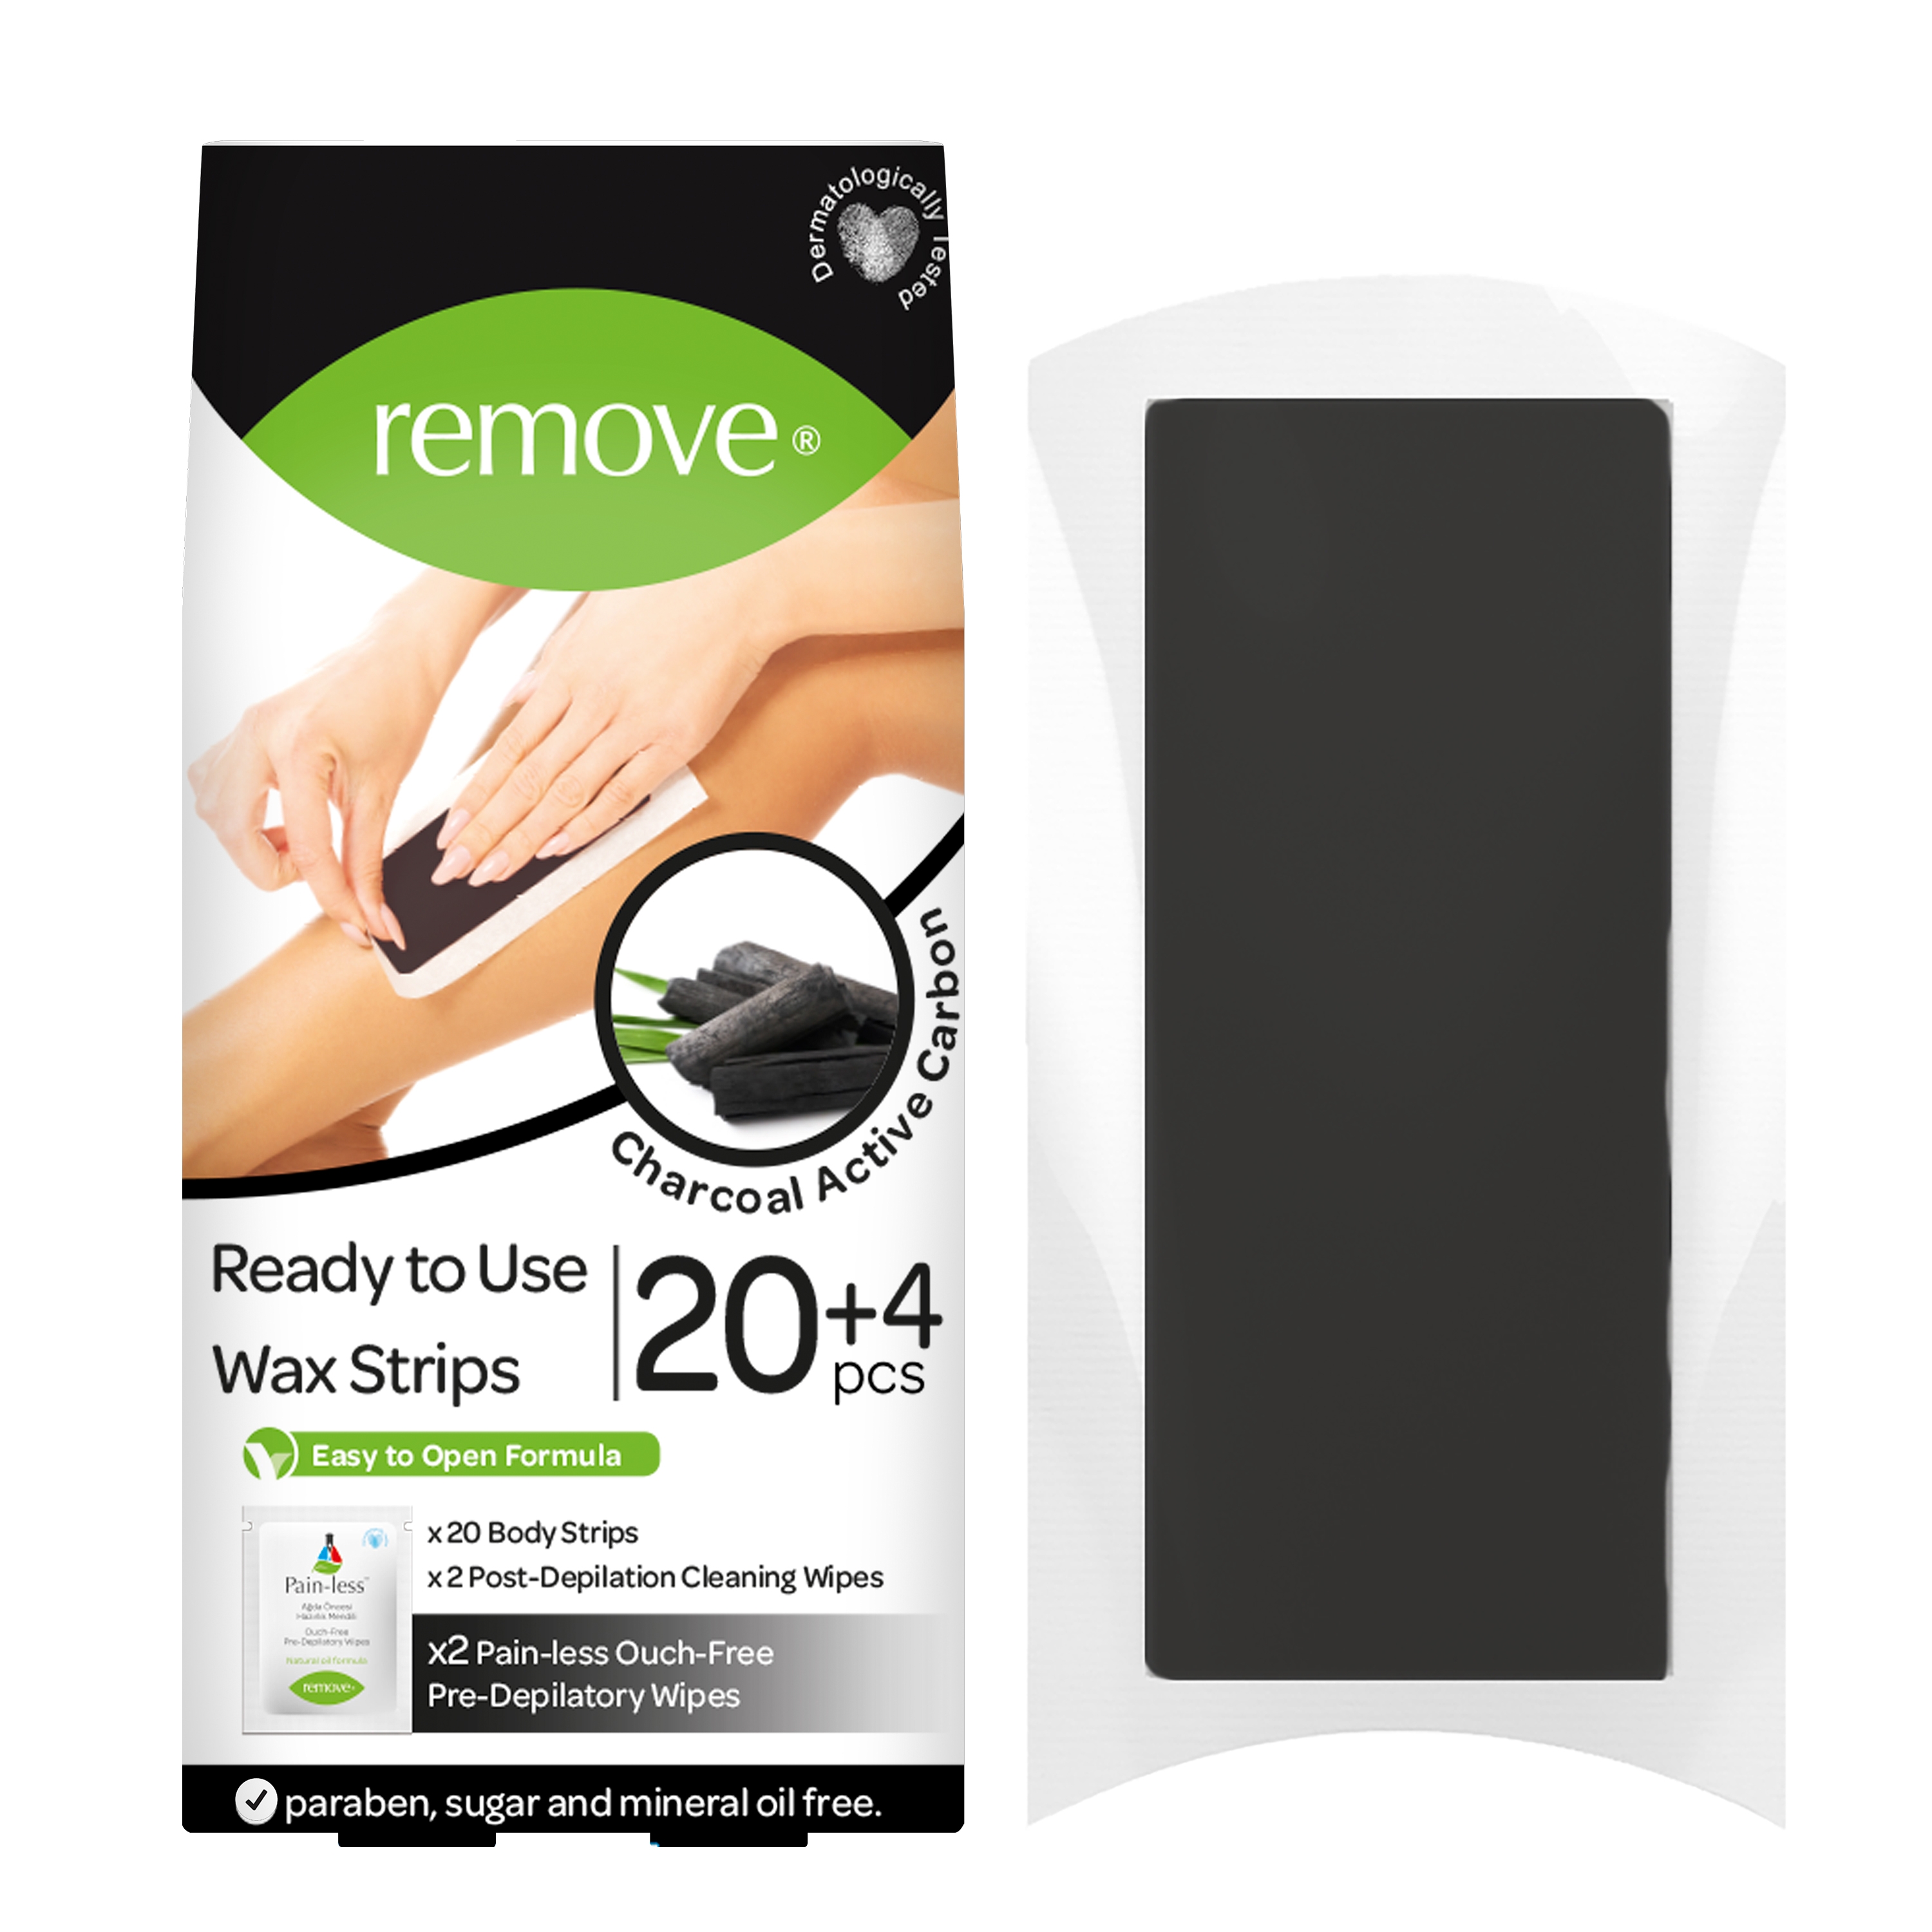 REMOVE | Remove Wax Strips 24 Pcs Body Strips - Active Carbon Charcoal  (20 Body Strips & 2 Pain-Less + 4 Post Depilation Cleaning Wipes)